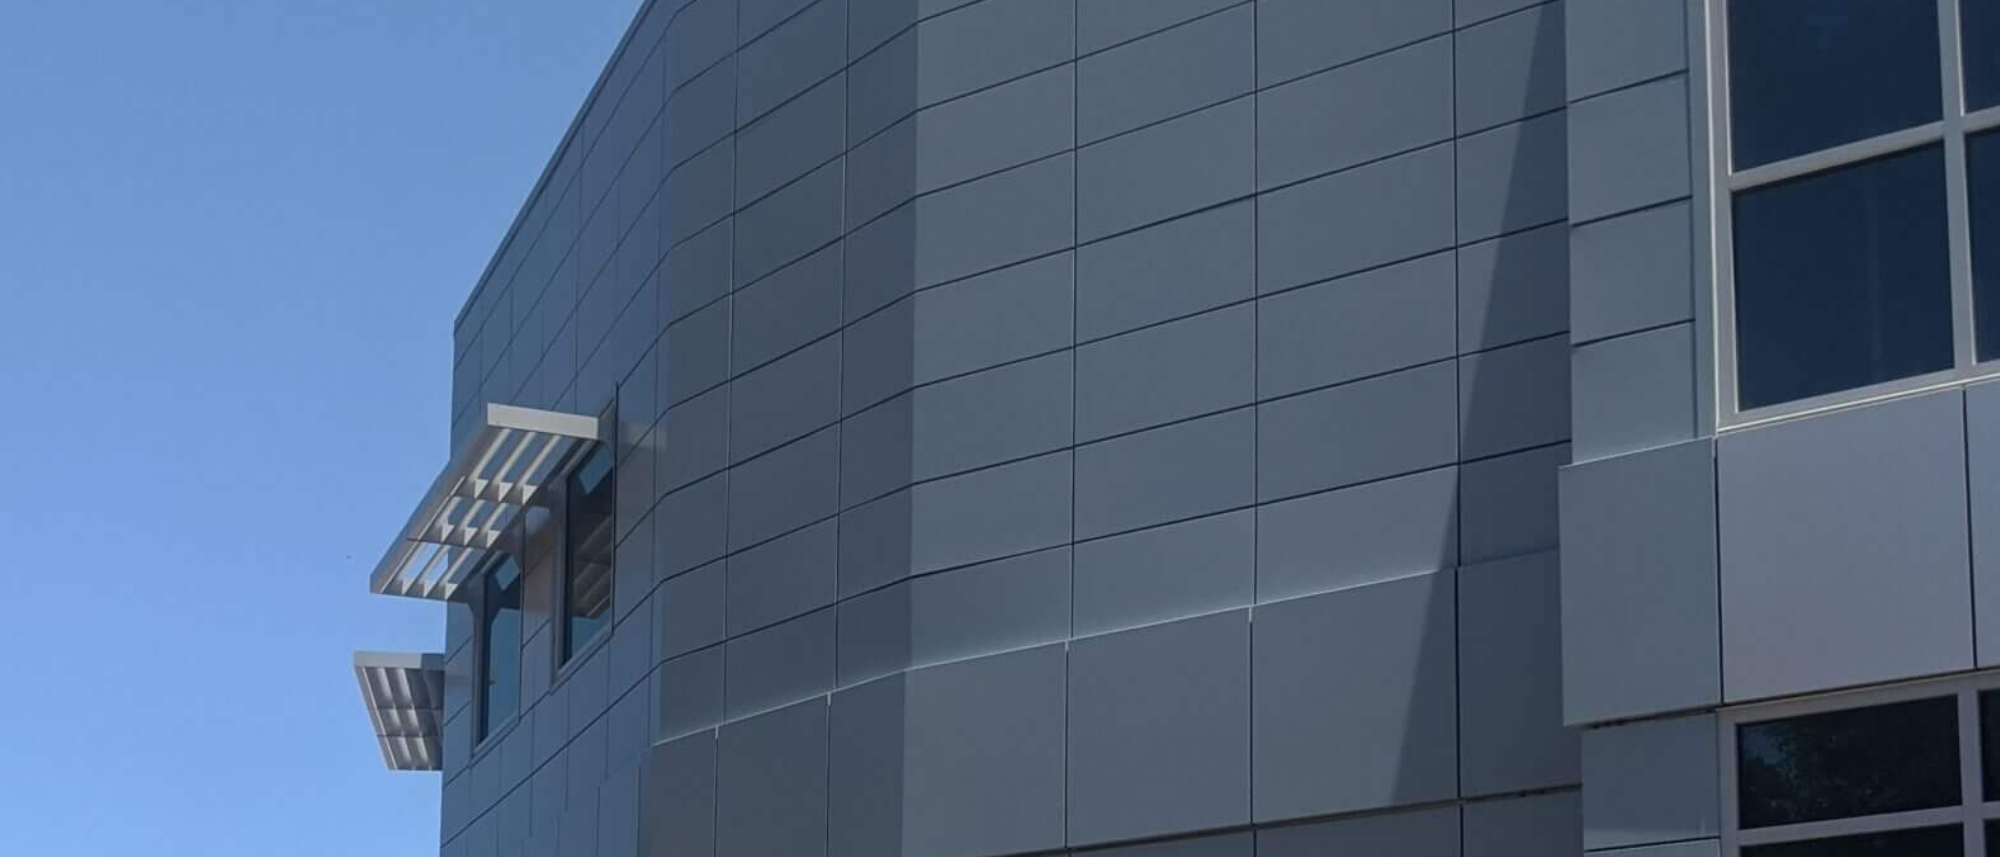 The Importance and Benefits of Sheet Metal in Architecture